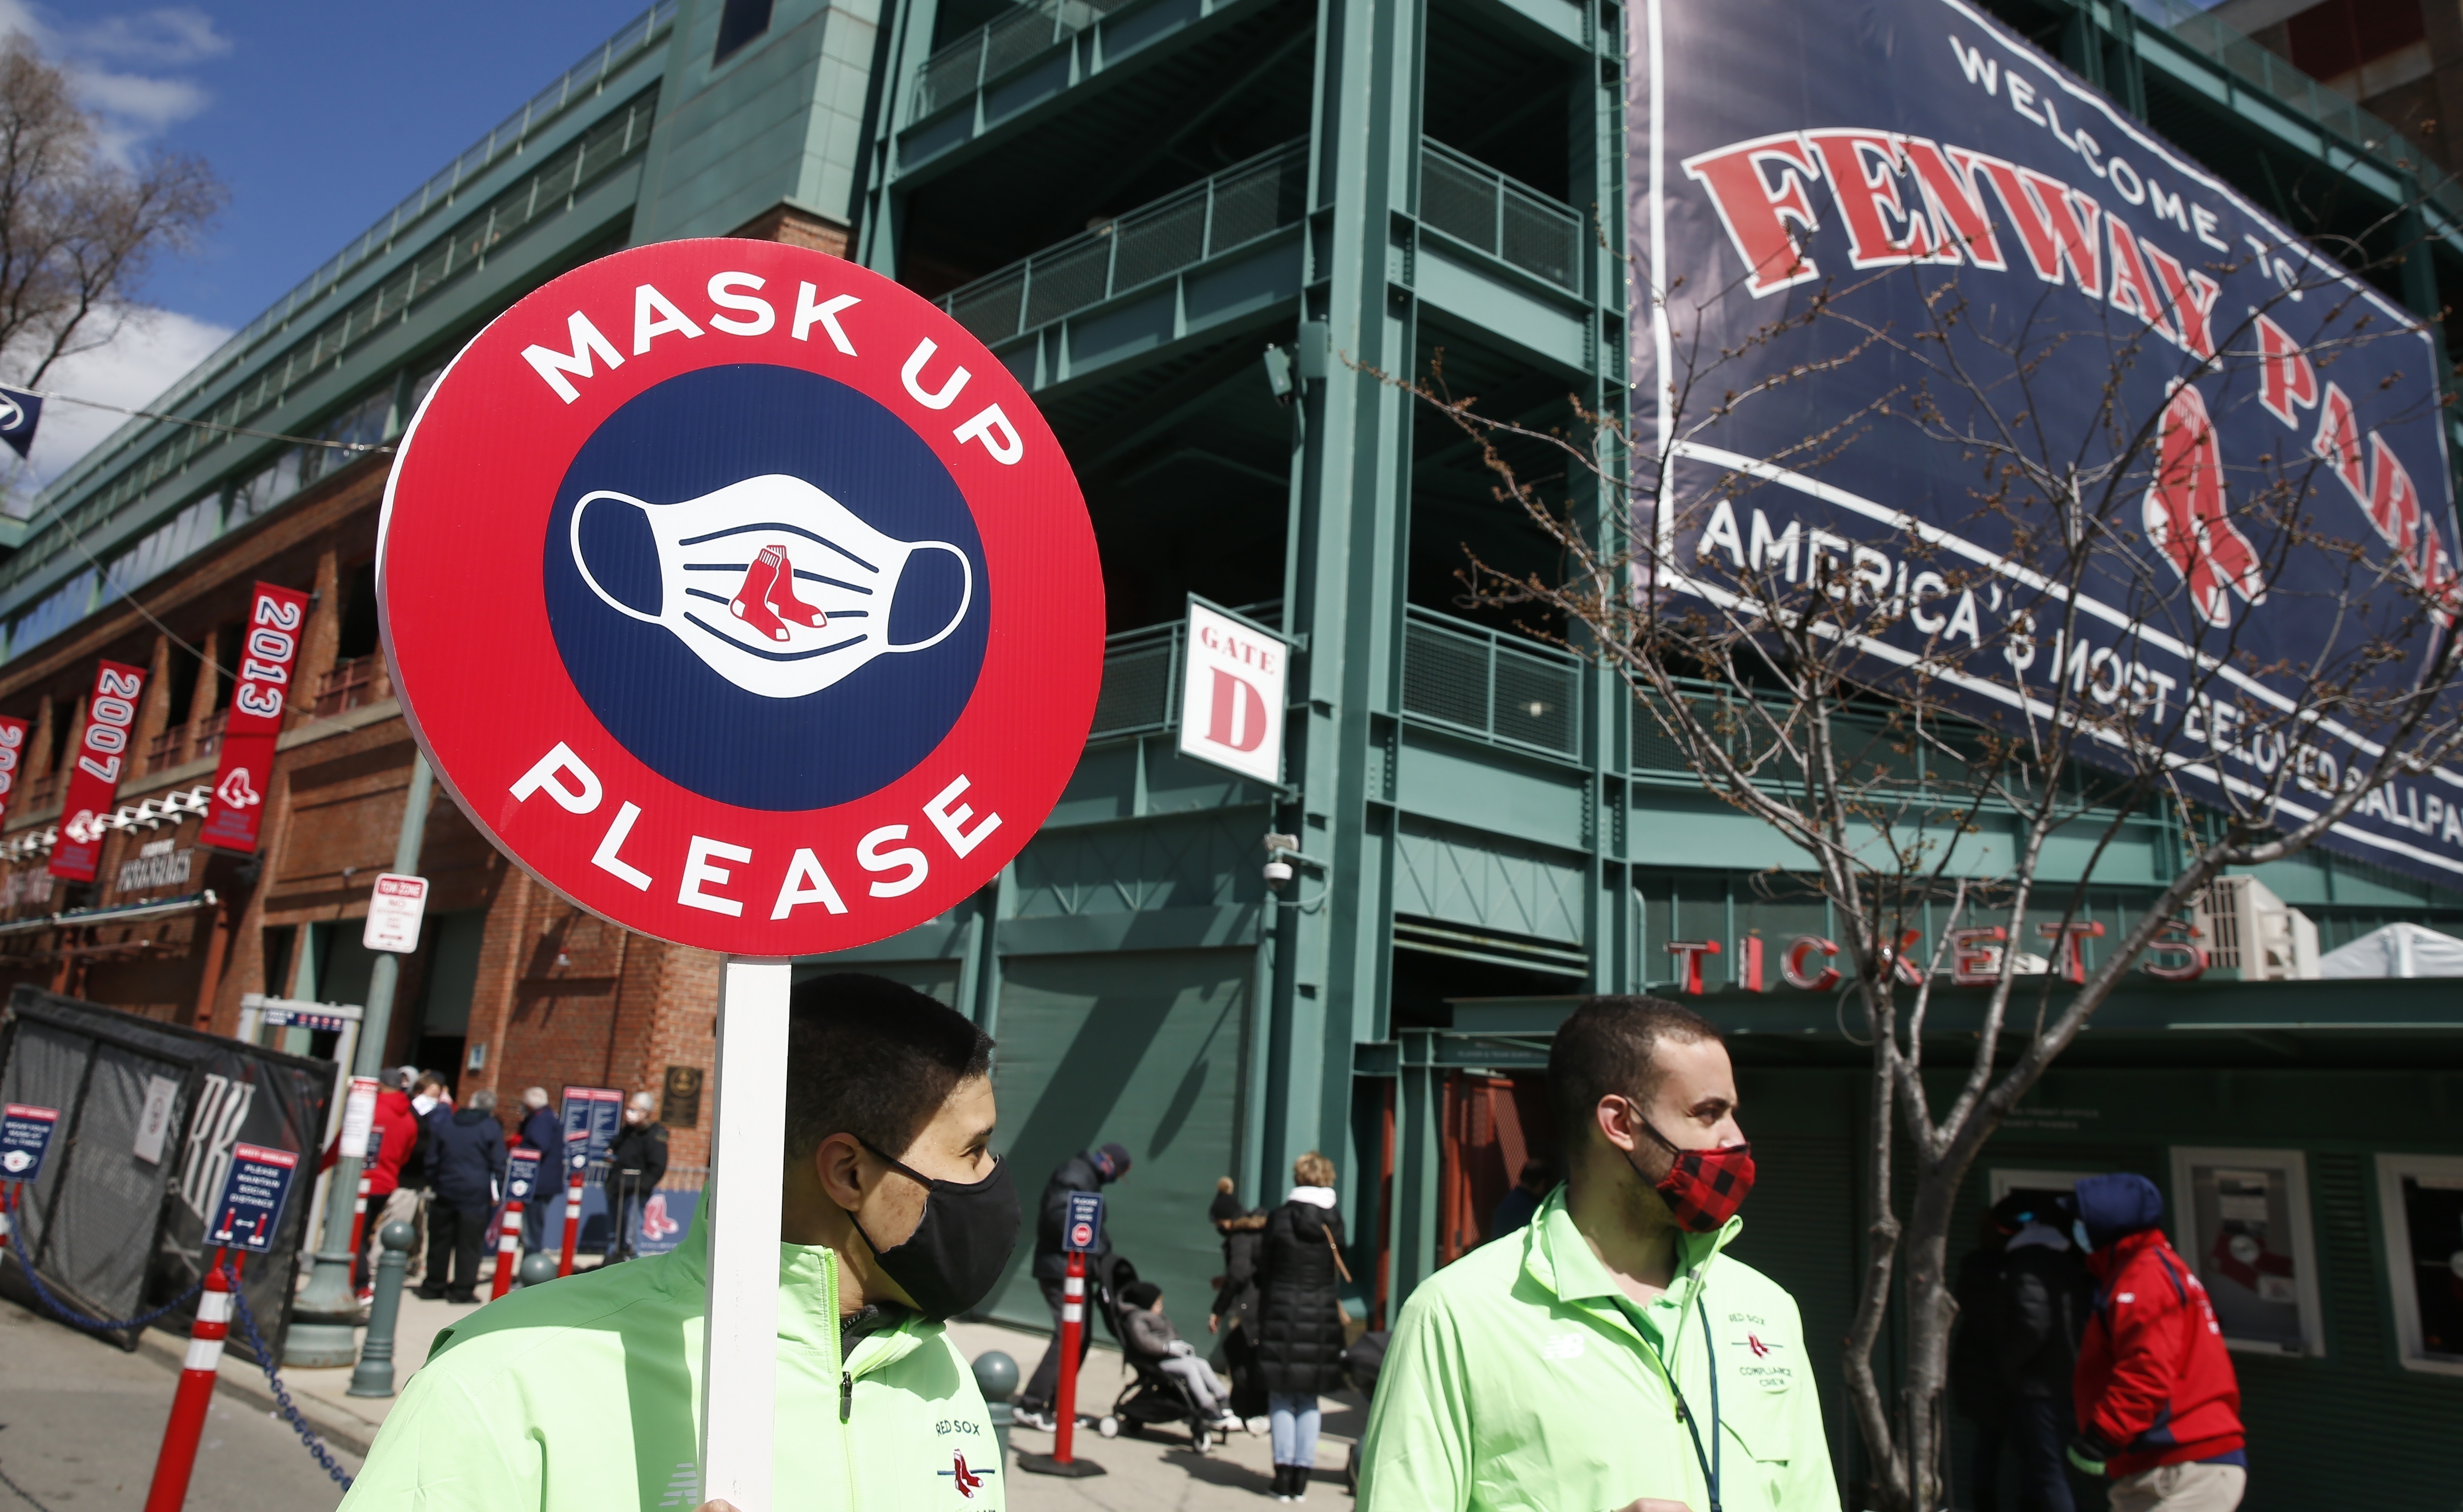 Here's where Boston's new indoor mask mandate applies at Fenway Park